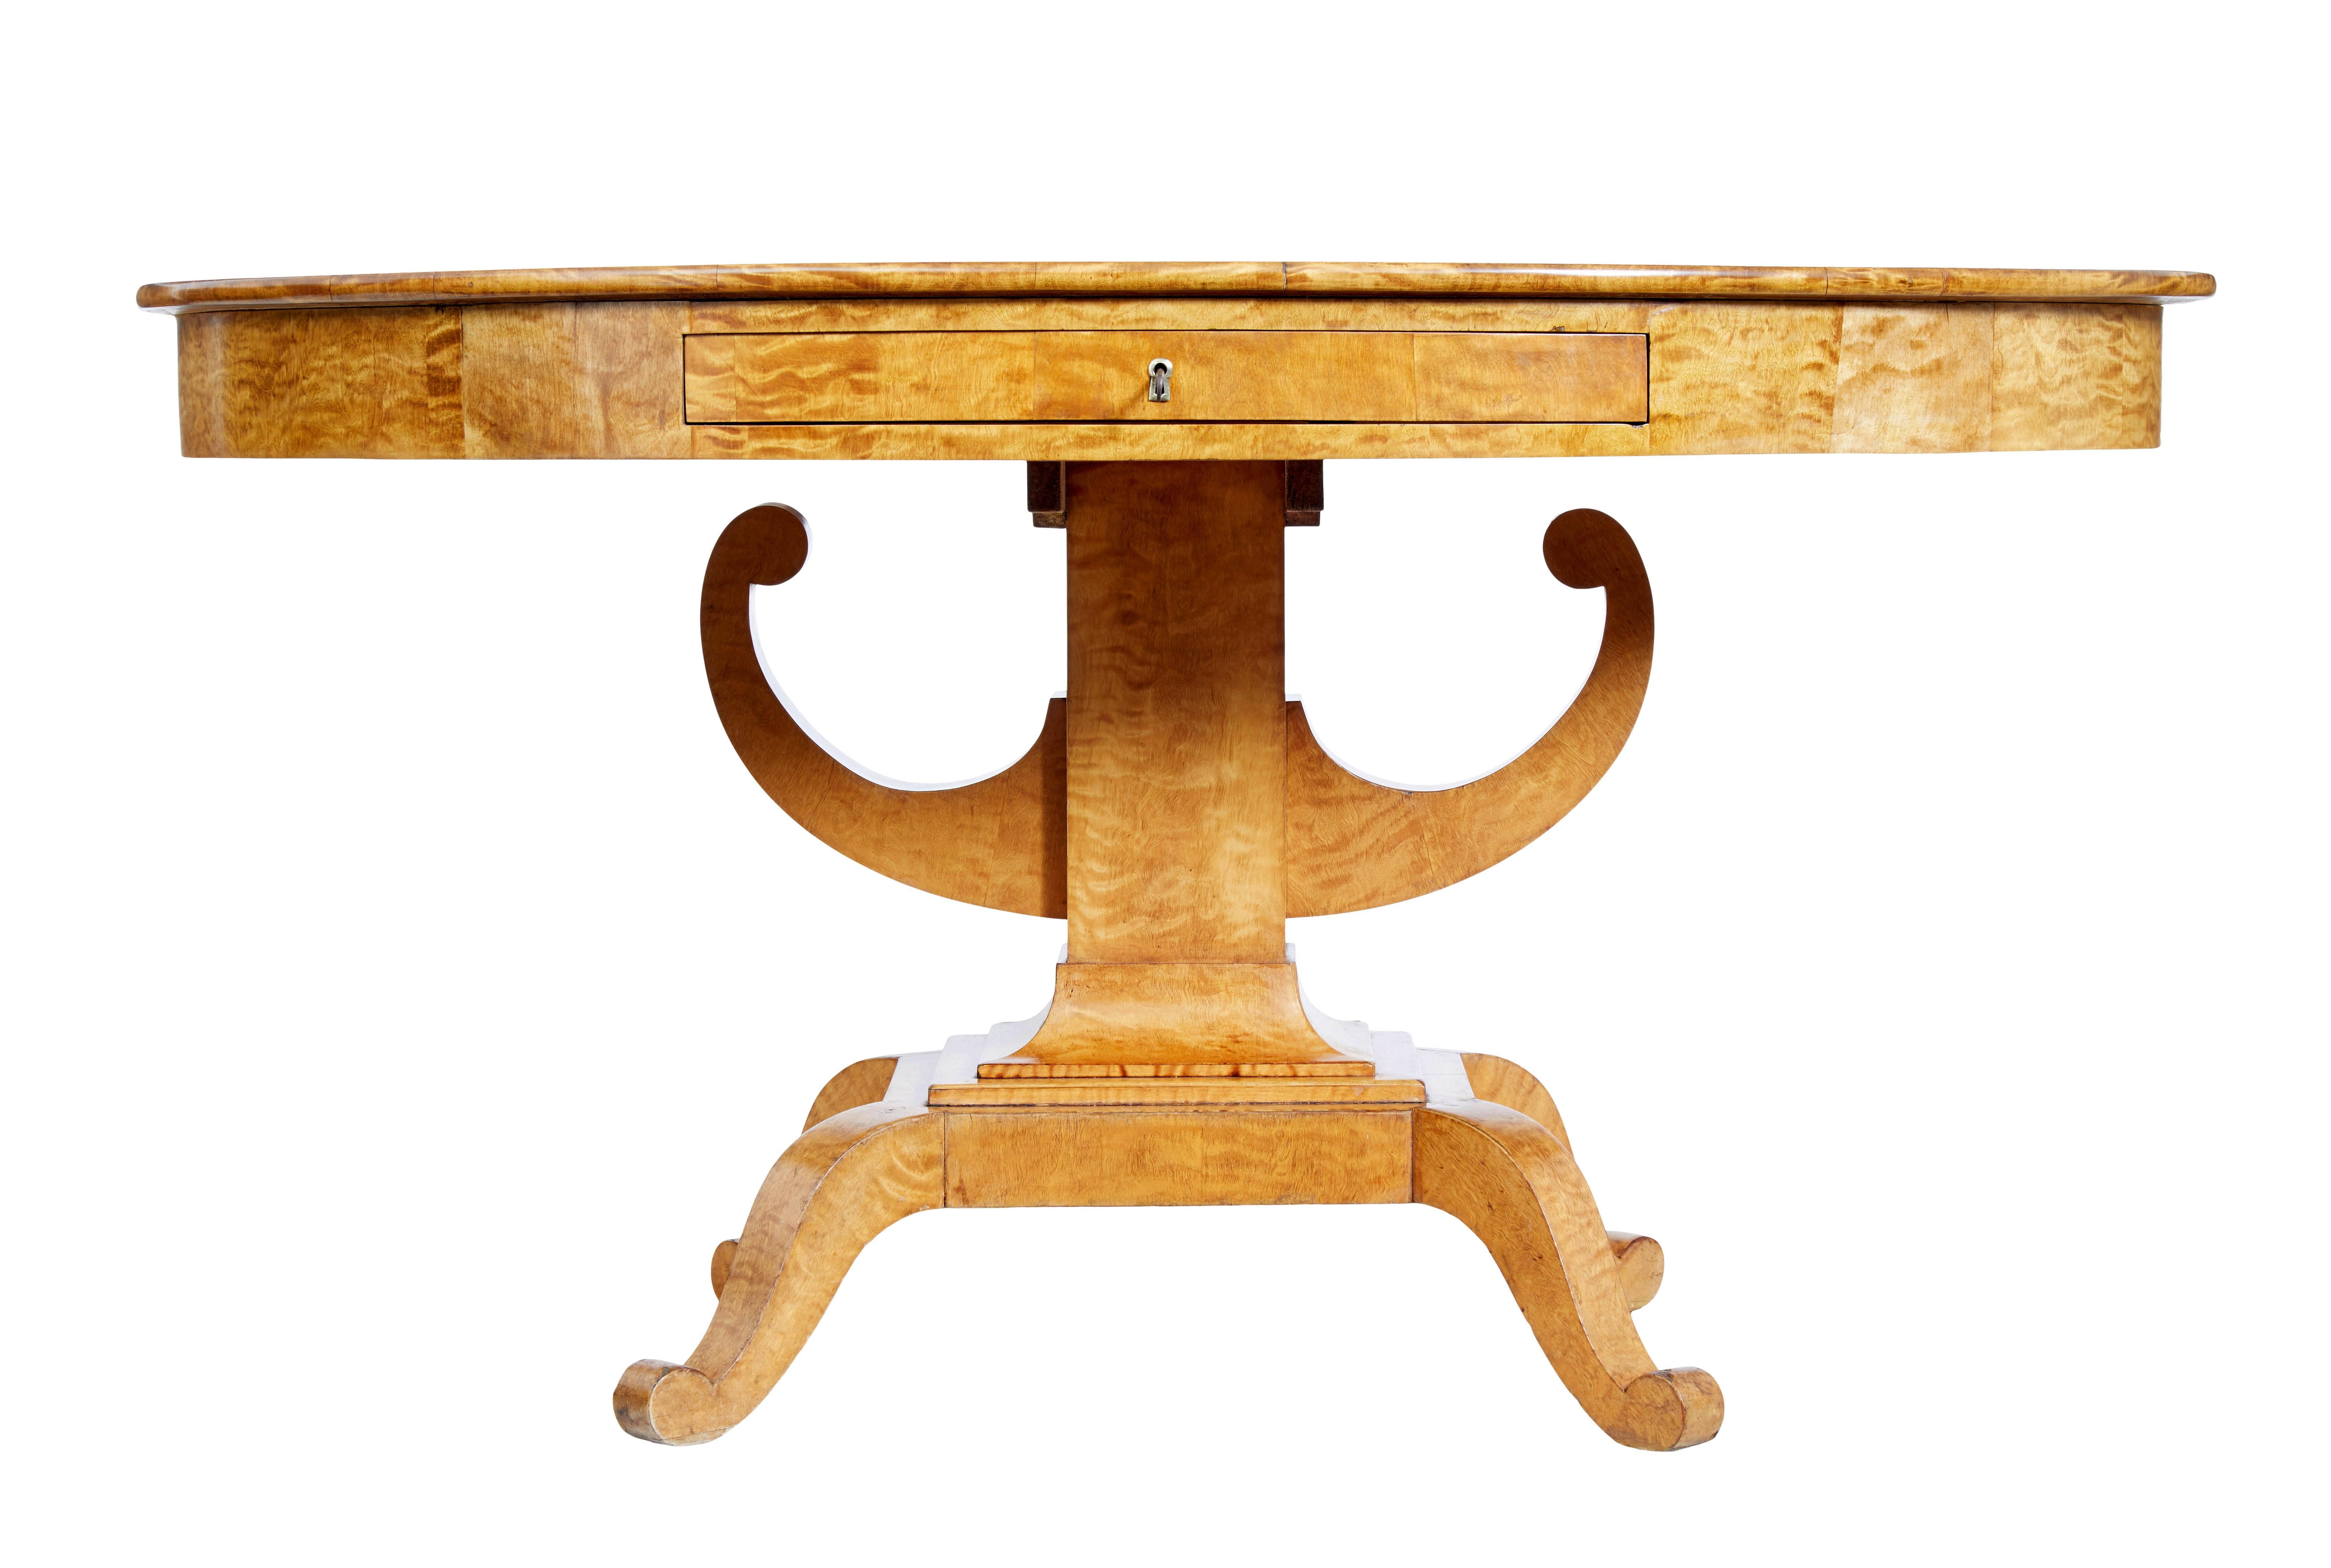 Oval 19th century birch empire center table, circa 1860

Beautiful Swedish birch center table.�  Oval top surface with matched birch veneers and striking grain.  Deep freize with single drawer to the front.  Supported by a block base and scroll